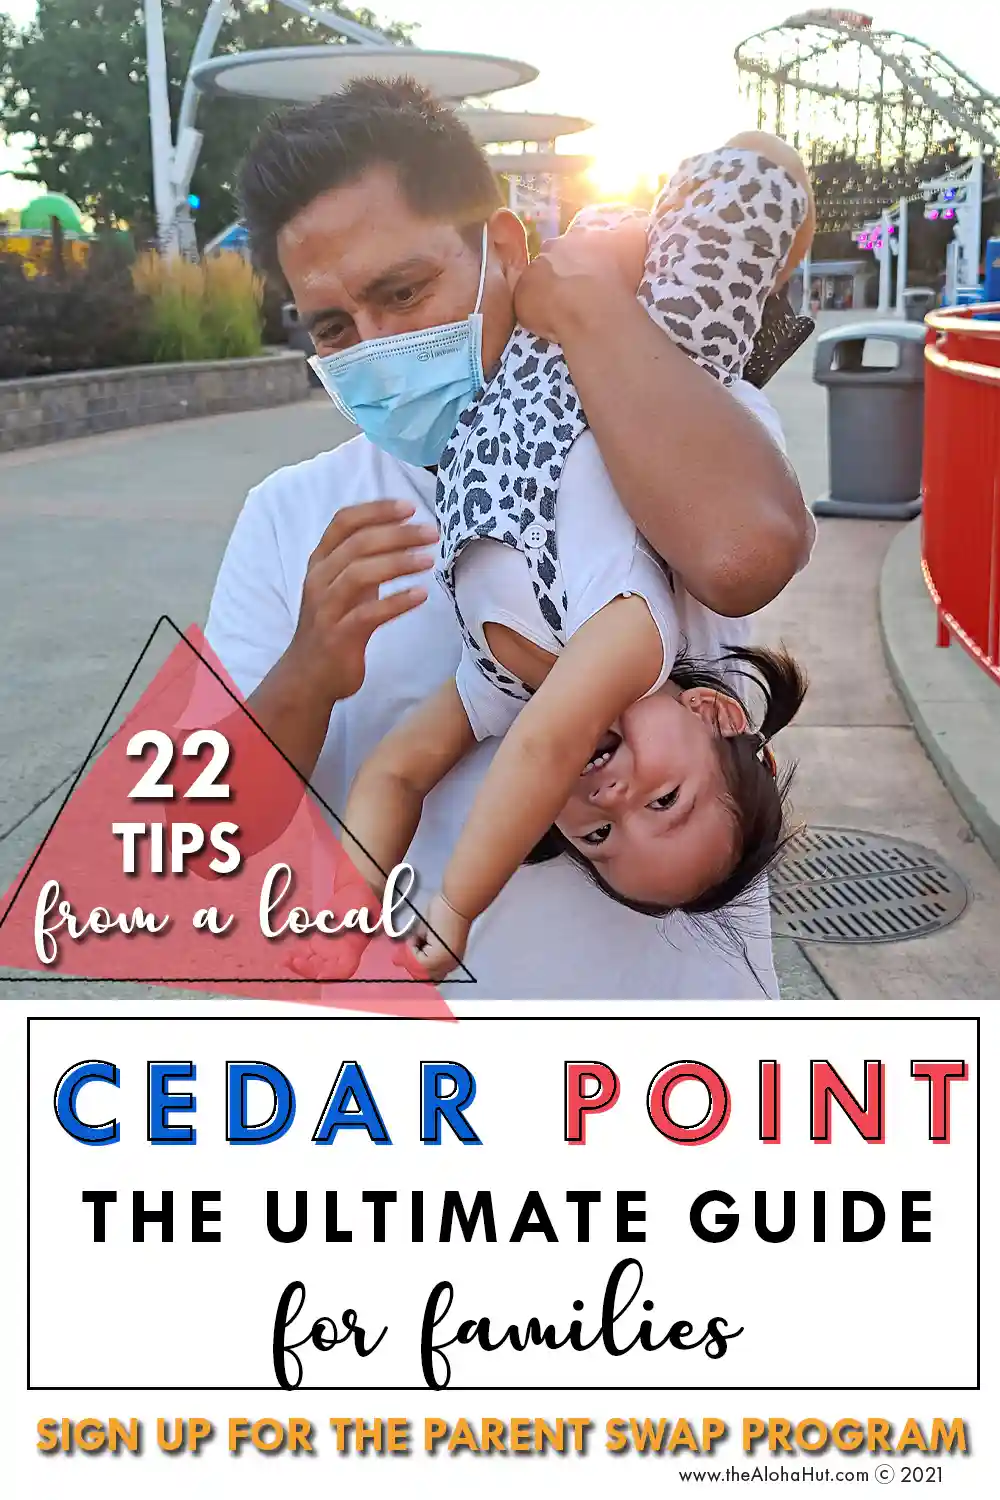 Cedar Point the Ultimate Guide for Families - Tips & Tricks - Parent Swap